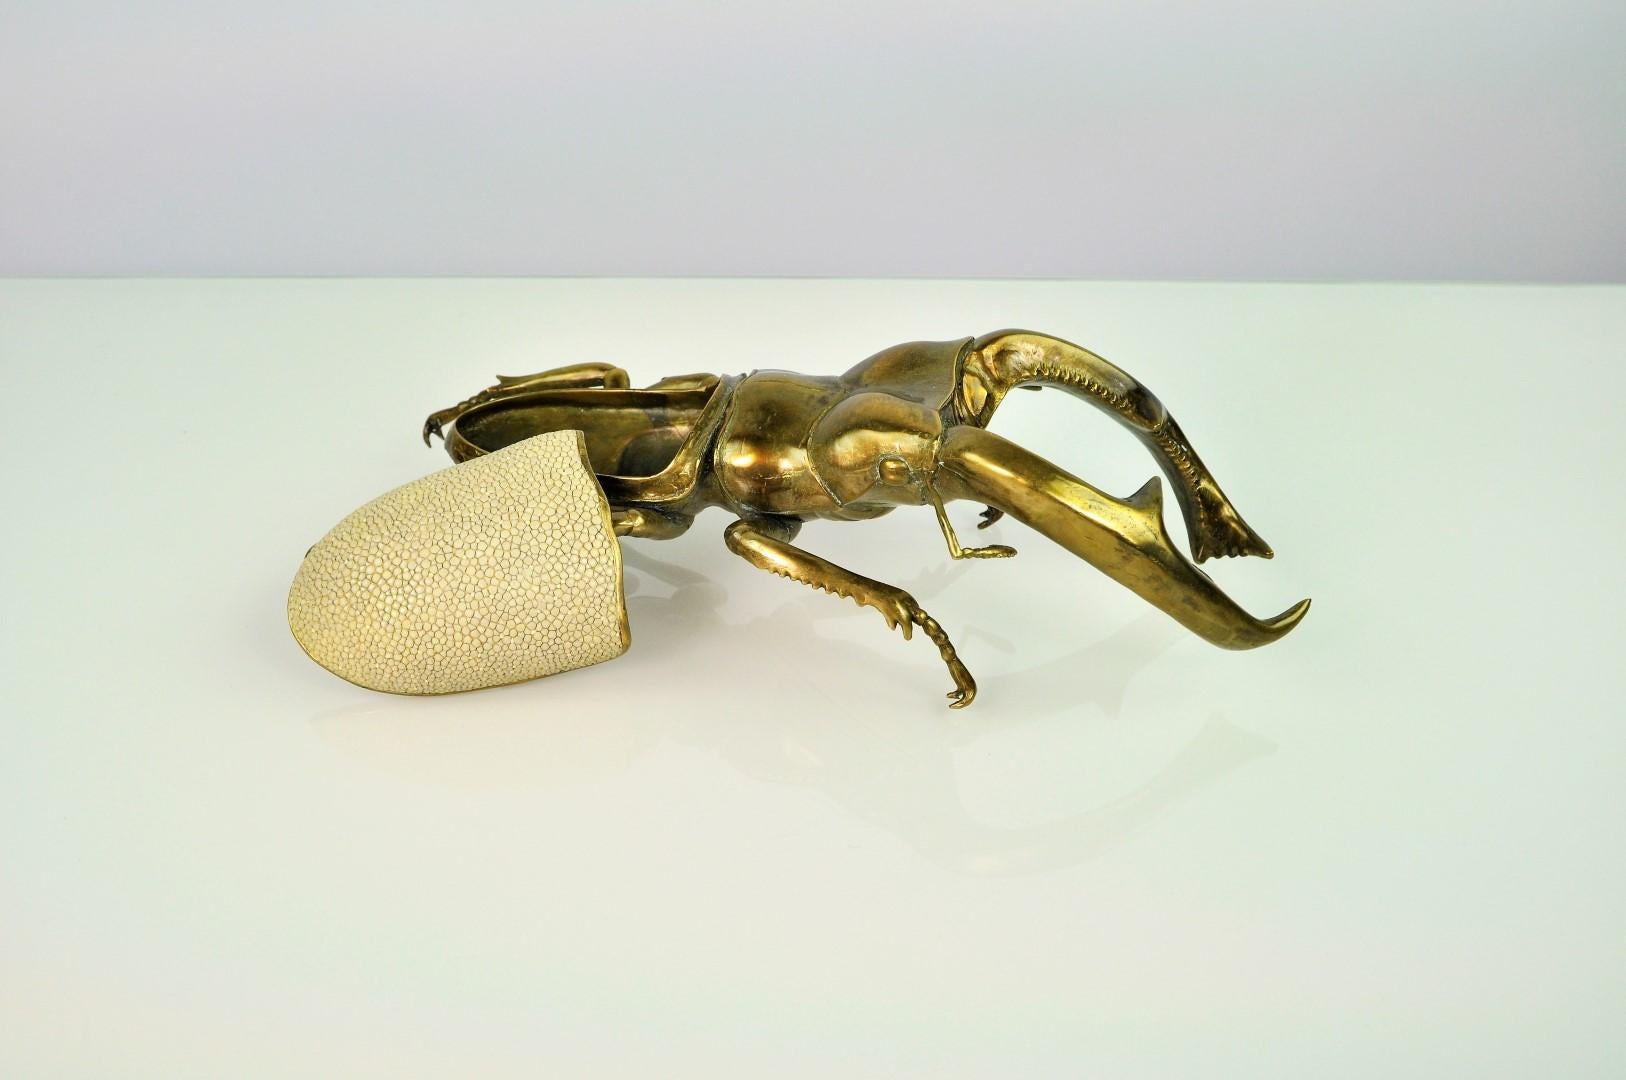 The Mandibularis Scarab box is a best seller at Ginger Brown
This piece is made in lost wax cast brass with a bronze patina. The brass lid is covered in shagreen.

That box has been realized from a real scarab. The famous Hexarthrius mandibularis